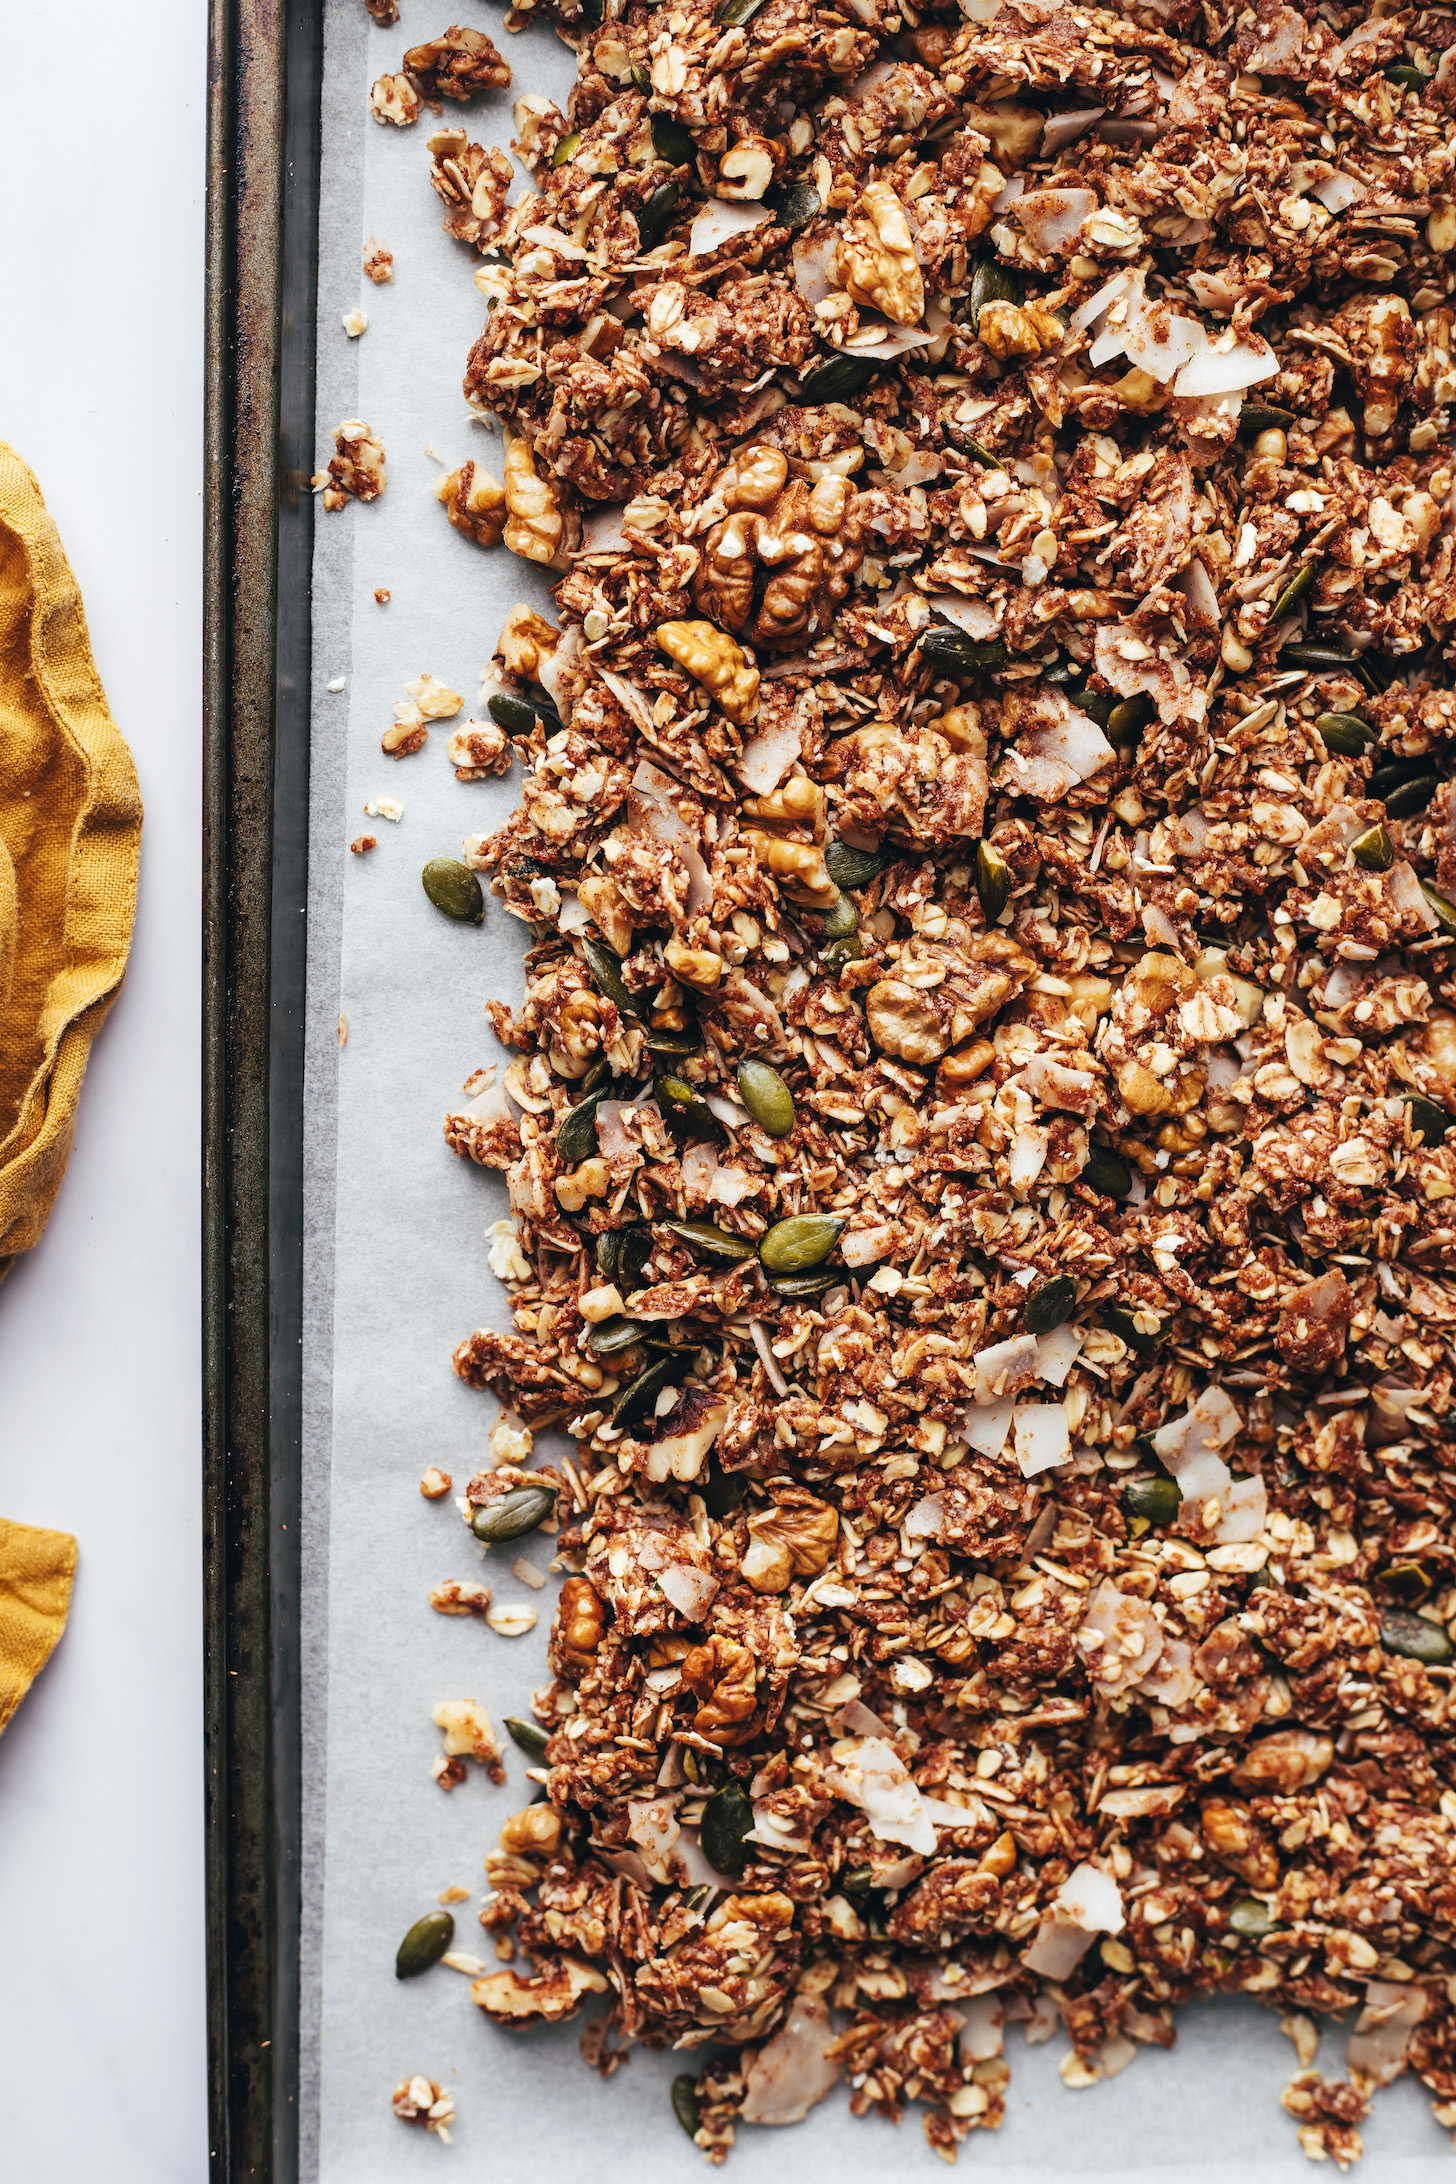 Baking Sheet of Chunky Tea-Spiced Granola with Pumpkin Seeds and Walnuts